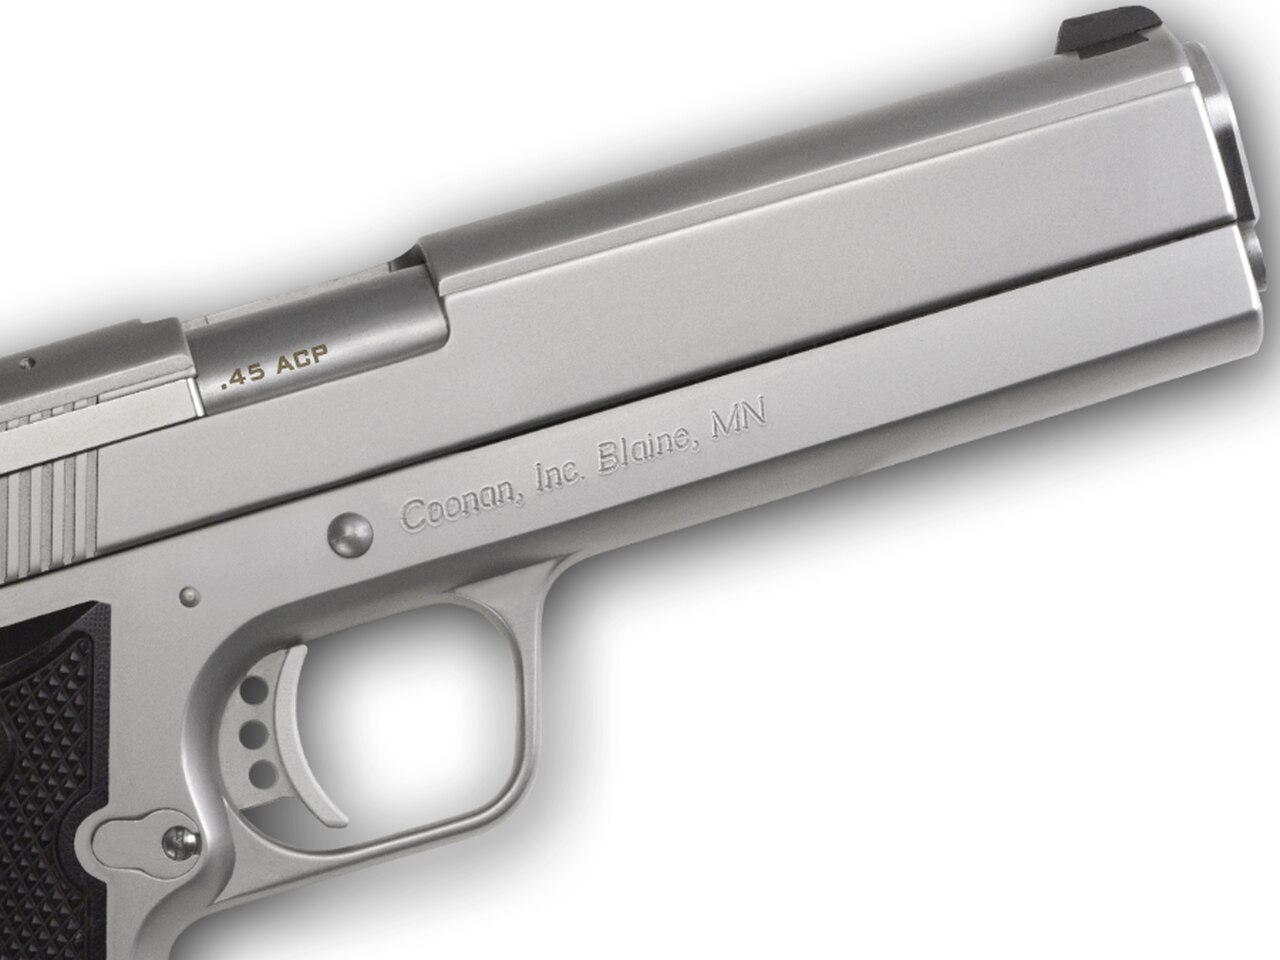 Image of Coonan MOT 45 ACP, 5", Satin Stainless, Fixed White Dot Sights, Black Alum Grips, 1 Mag (Special Order)